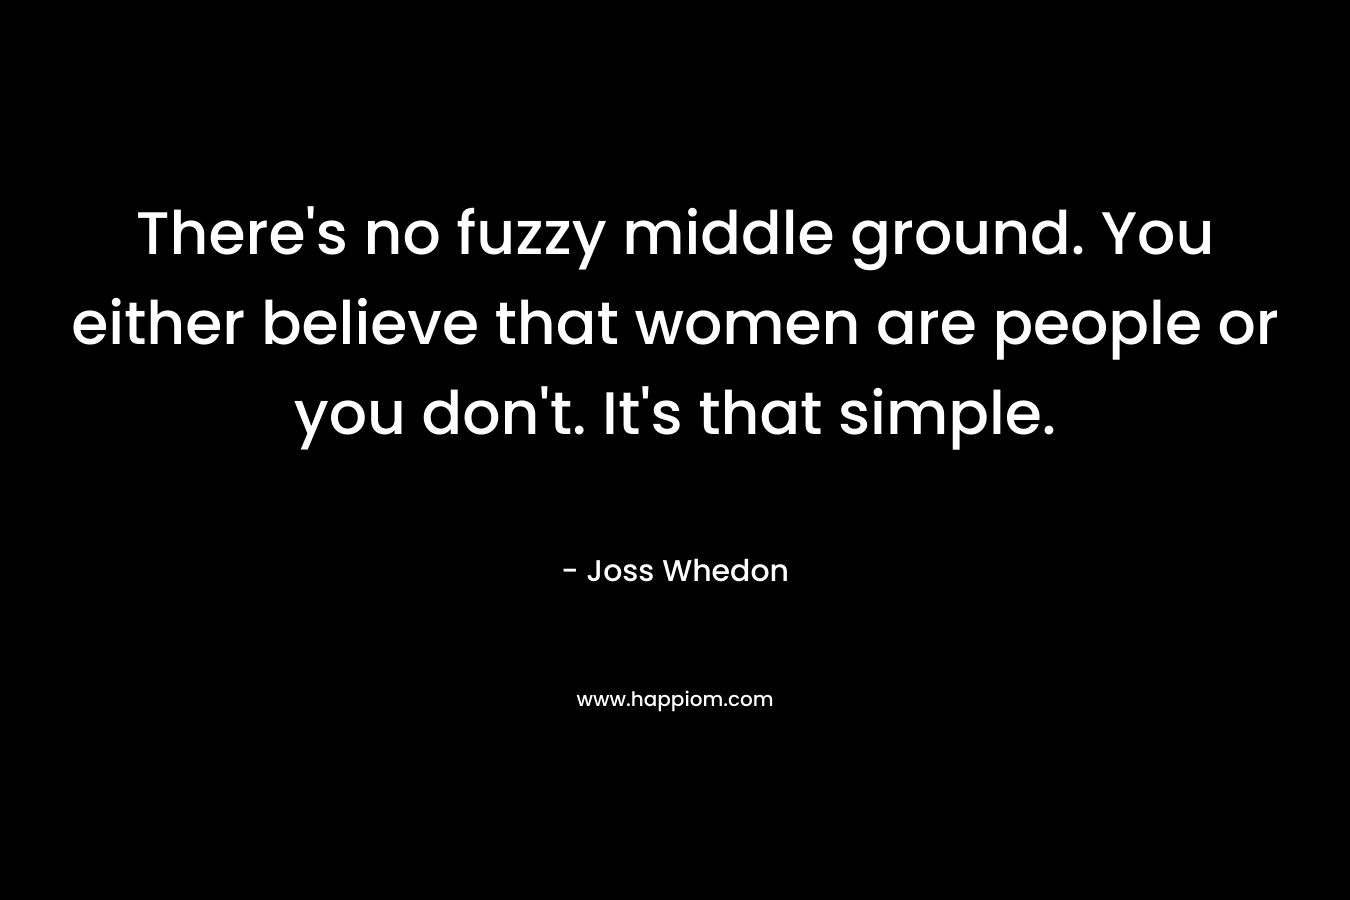 There's no fuzzy middle ground. You either believe that women are people or you don't. It's that simple.